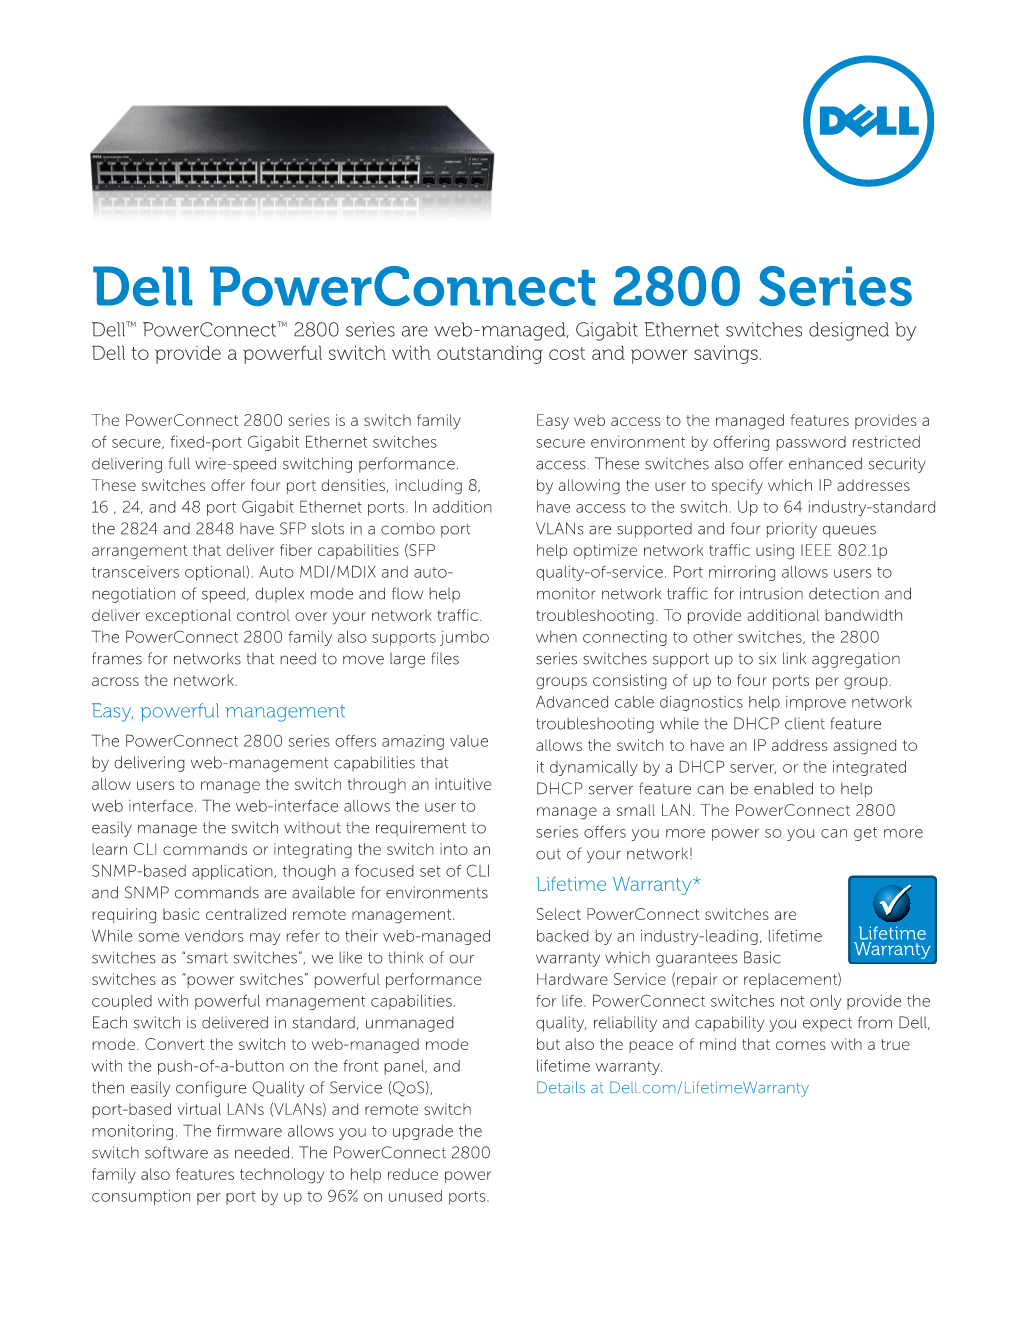 Dell Powerconnect 2800 Series